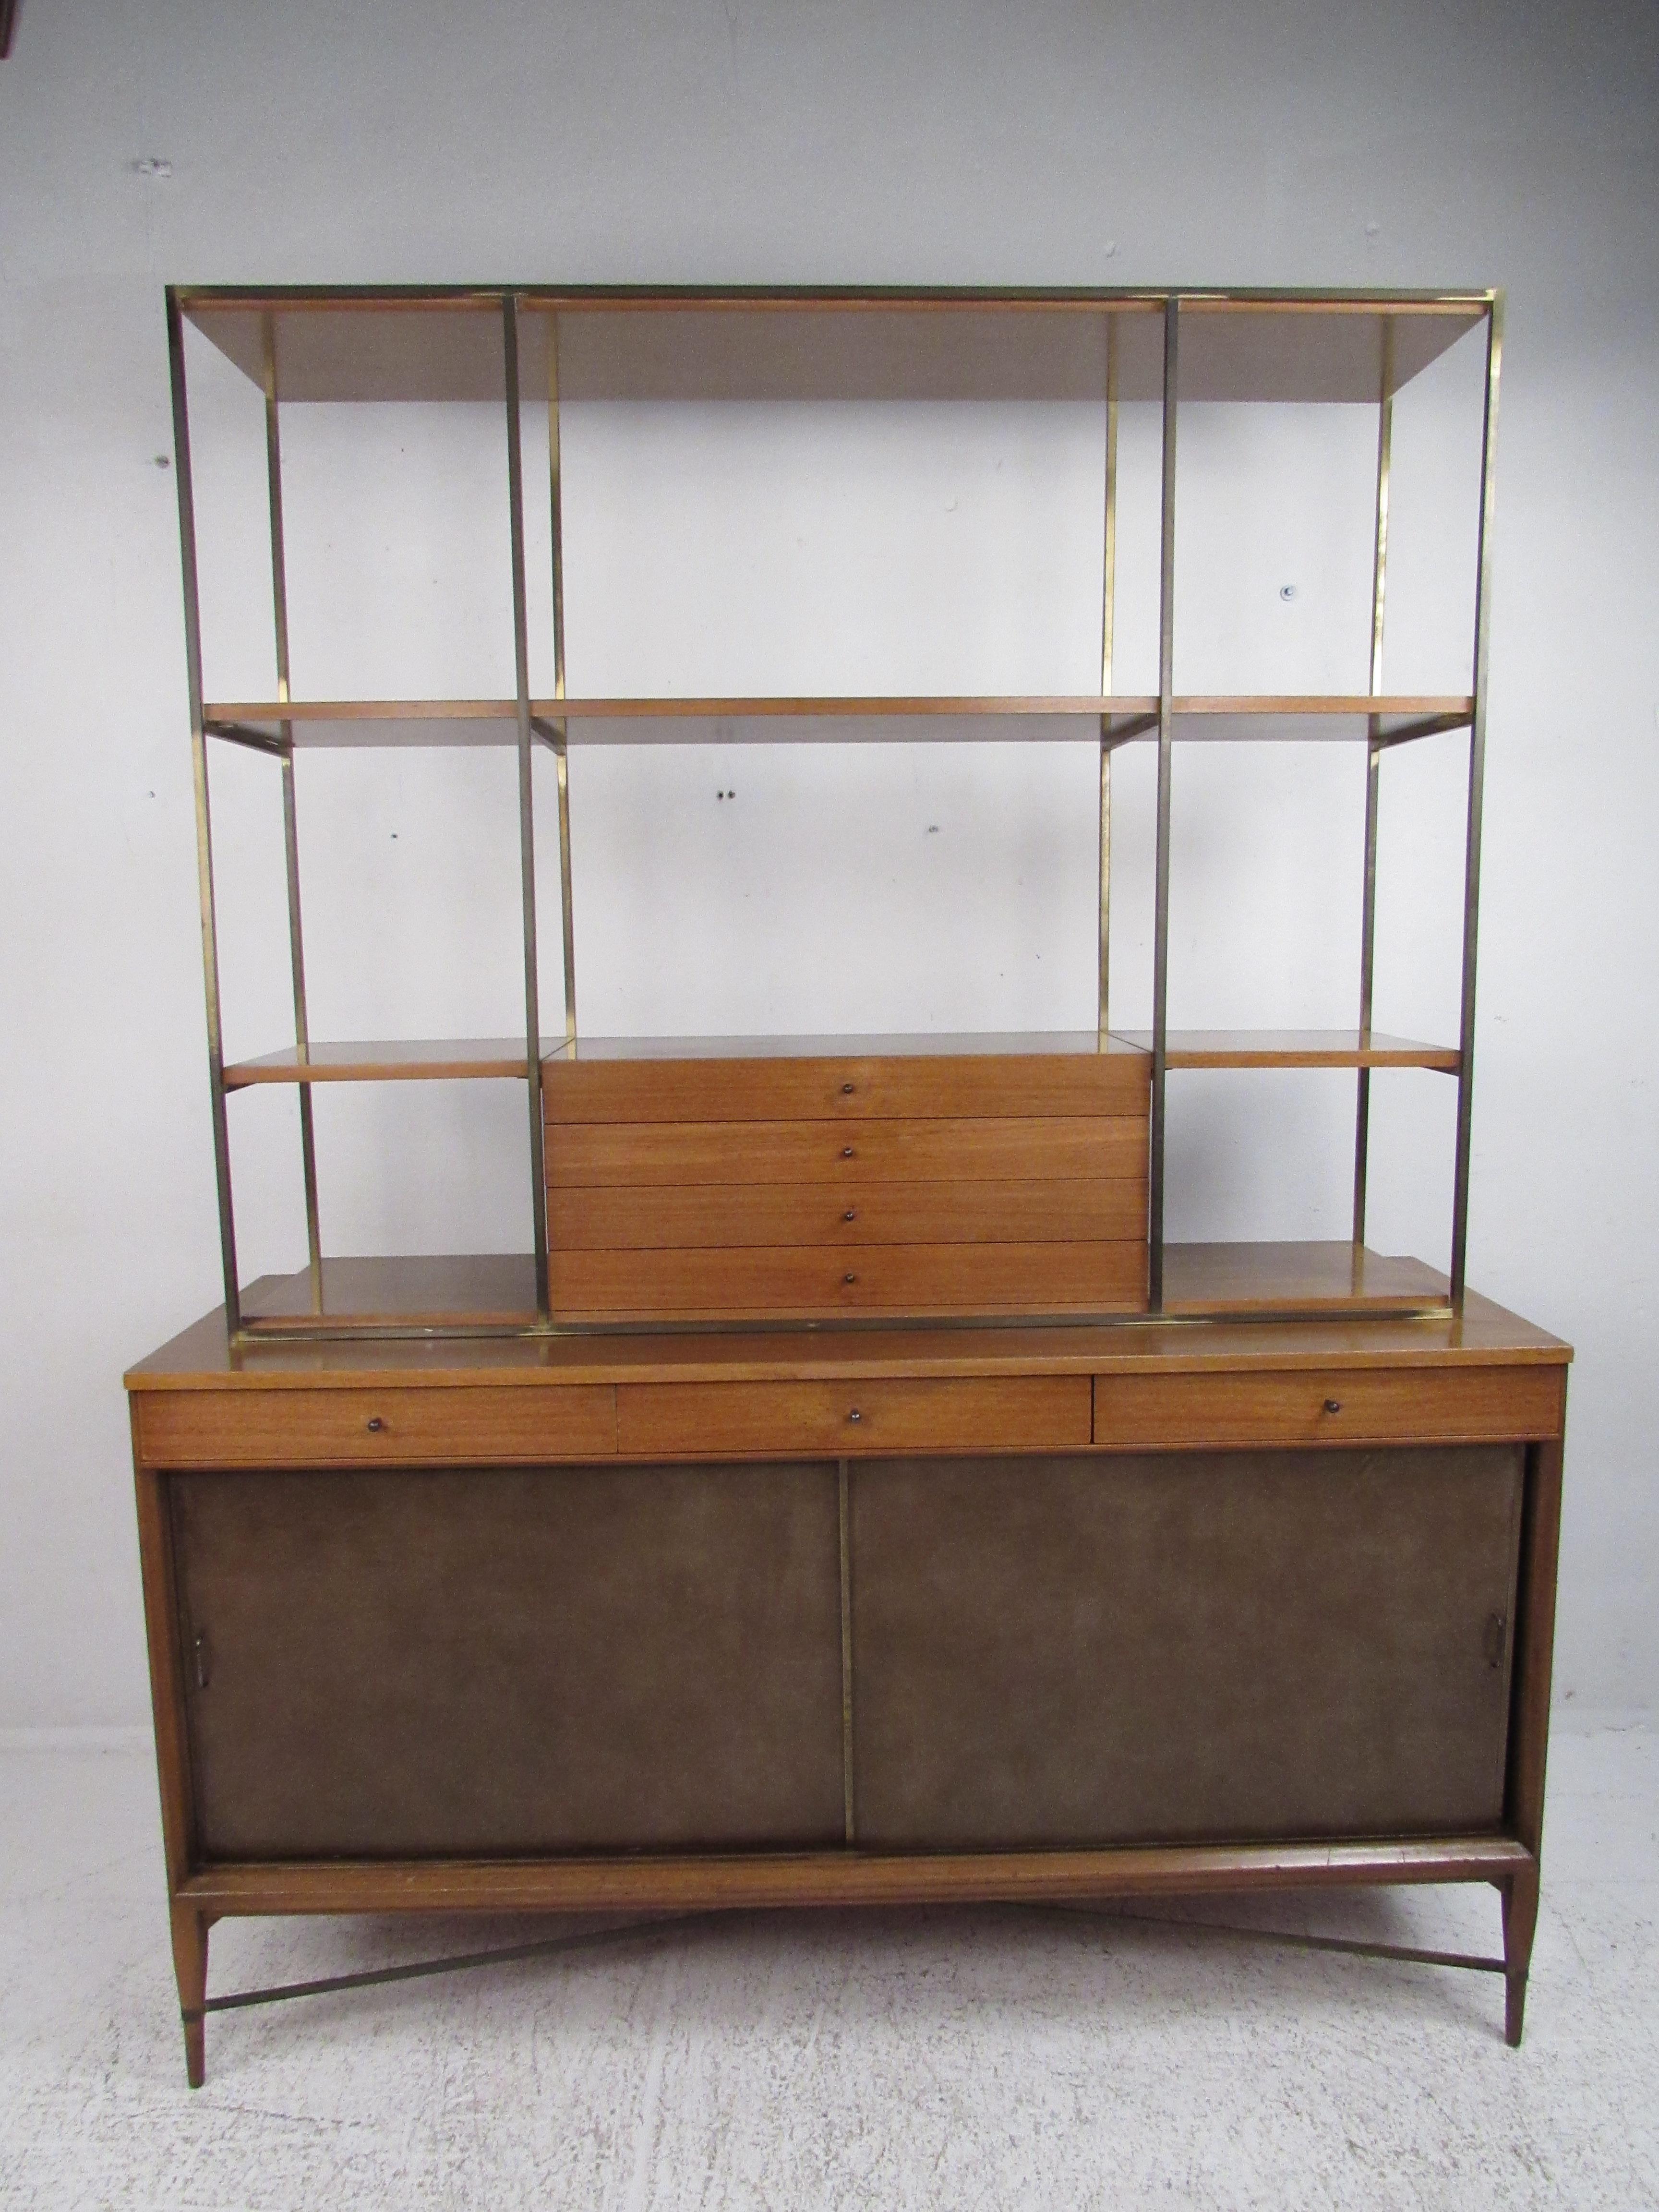 A beautiful vintage modern buffet with a breakfront by Paul McCobb for Calvin. This two-piece hutch features a sliding door credenza with three drawers and an elegant display topper with a brass frame. This piece offers plenty of room for storage